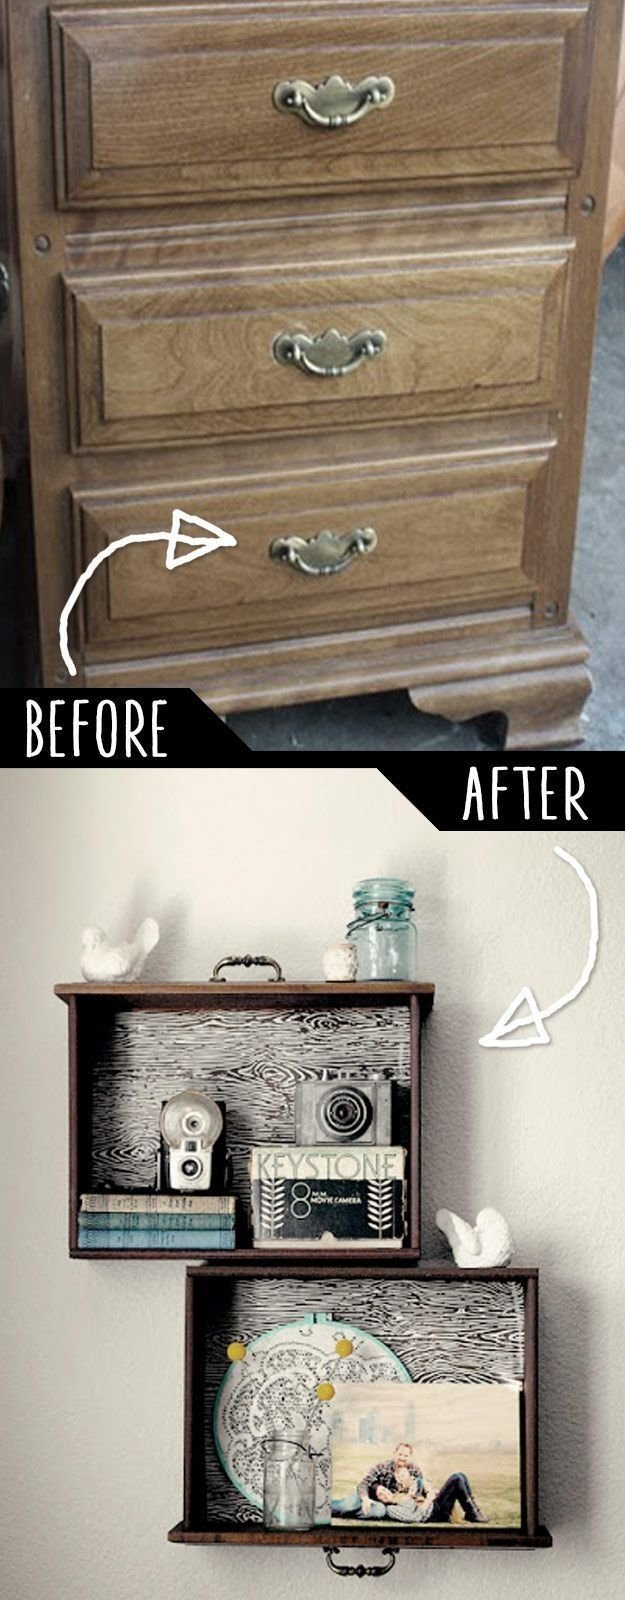 10 Amazing Do It Yourself Furniture Ideas diy furniture hacks diy drawer shelves cool ideas for creative 2022